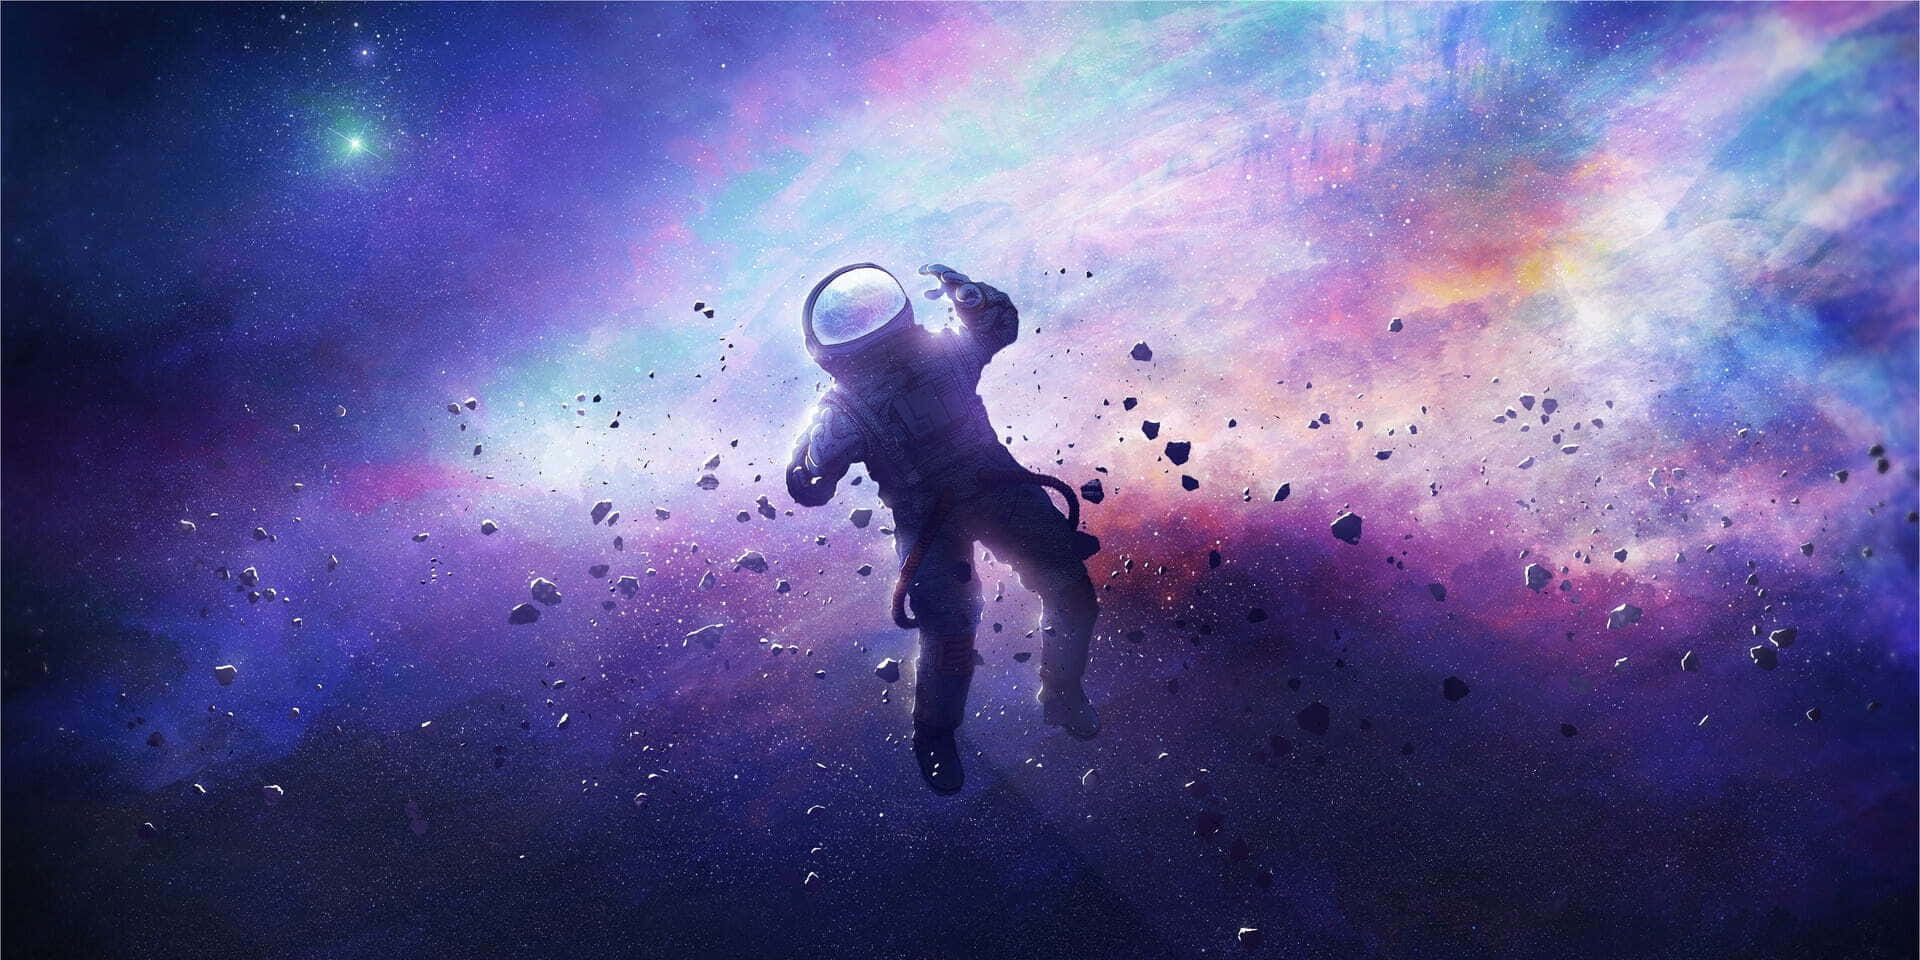 Explore the beauty of the galaxies through this colorful themed painting Wallpaper